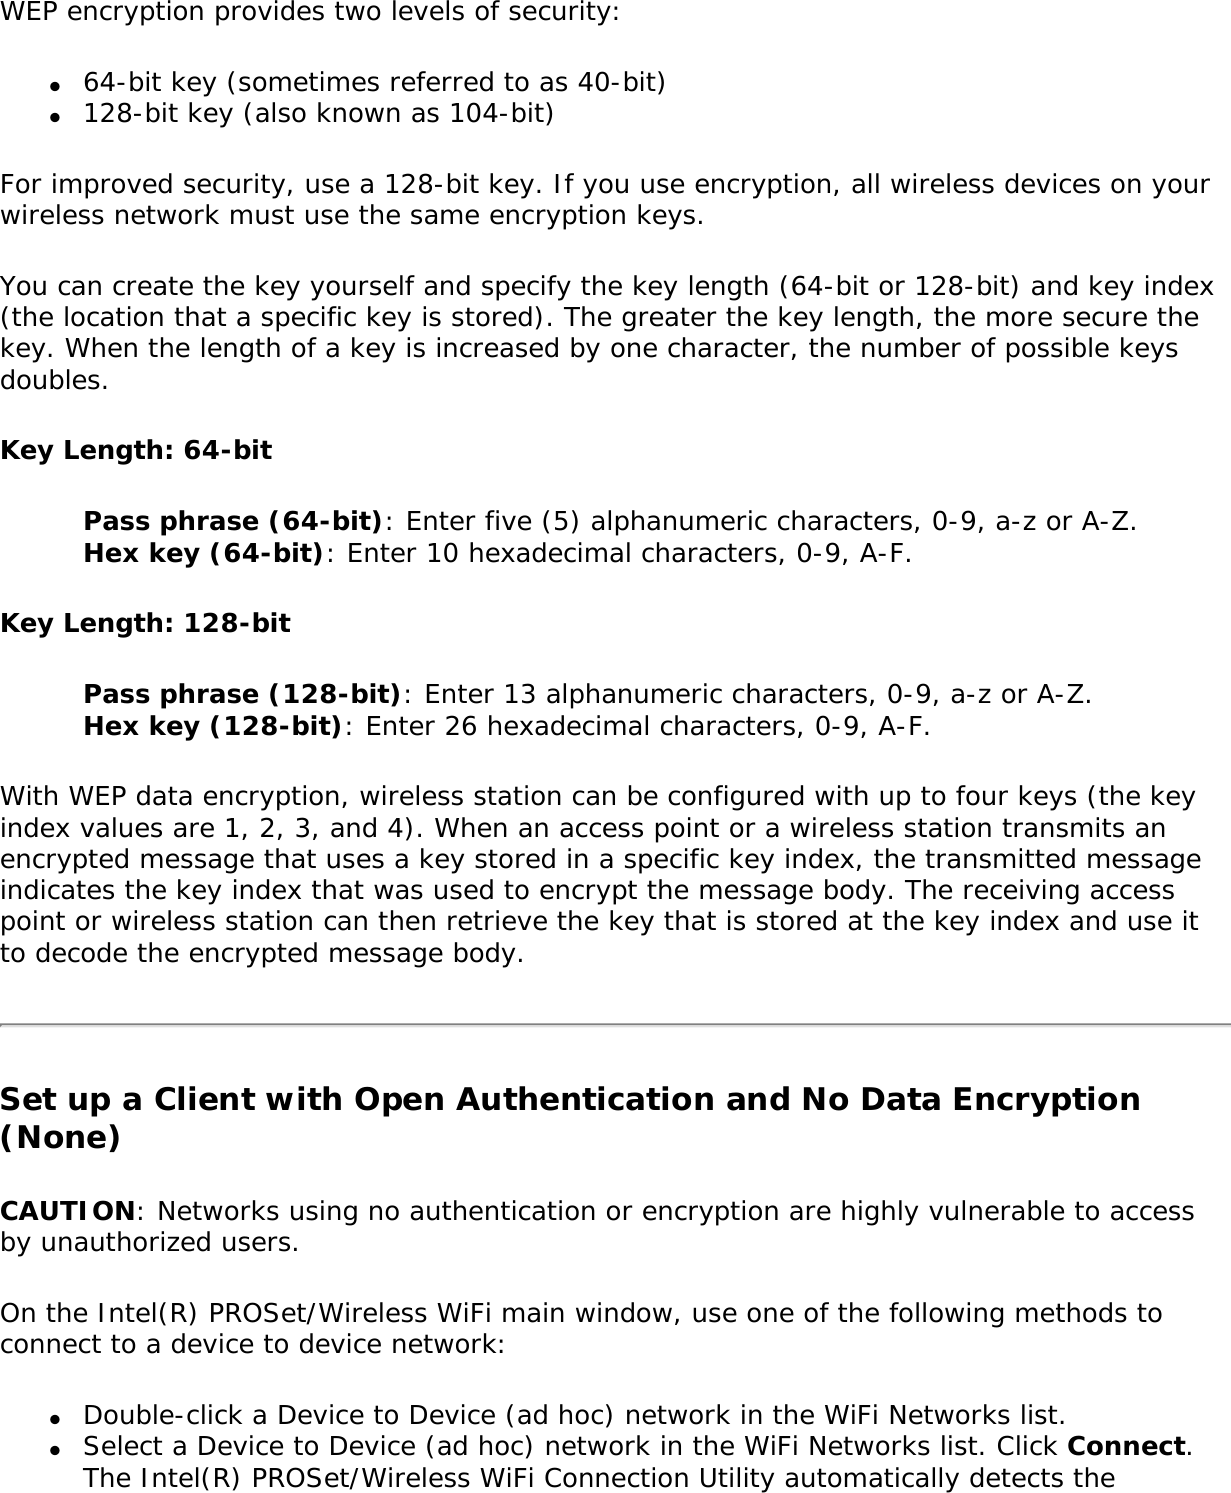 WEP encryption provides two levels of security:●     64-bit key (sometimes referred to as 40-bit)●     128-bit key (also known as 104-bit)For improved security, use a 128-bit key. If you use encryption, all wireless devices on your wireless network must use the same encryption keys.You can create the key yourself and specify the key length (64-bit or 128-bit) and key index (the location that a specific key is stored). The greater the key length, the more secure the key. When the length of a key is increased by one character, the number of possible keys doubles.Key Length: 64-bitPass phrase (64-bit): Enter five (5) alphanumeric characters, 0-9, a-z or A-Z. Hex key (64-bit): Enter 10 hexadecimal characters, 0-9, A-F. Key Length: 128-bitPass phrase (128-bit): Enter 13 alphanumeric characters, 0-9, a-z or A-Z. Hex key (128-bit): Enter 26 hexadecimal characters, 0-9, A-F.With WEP data encryption, wireless station can be configured with up to four keys (the key index values are 1, 2, 3, and 4). When an access point or a wireless station transmits an encrypted message that uses a key stored in a specific key index, the transmitted message indicates the key index that was used to encrypt the message body. The receiving access point or wireless station can then retrieve the key that is stored at the key index and use it to decode the encrypted message body.Set up a Client with Open Authentication and No Data Encryption (None) CAUTION: Networks using no authentication or encryption are highly vulnerable to access by unauthorized users. On the Intel(R) PROSet/Wireless WiFi main window, use one of the following methods to connect to a device to device network:●     Double-click a Device to Device (ad hoc) network in the WiFi Networks list. ●     Select a Device to Device (ad hoc) network in the WiFi Networks list. Click Connect. The Intel(R) PROSet/Wireless WiFi Connection Utility automatically detects the 